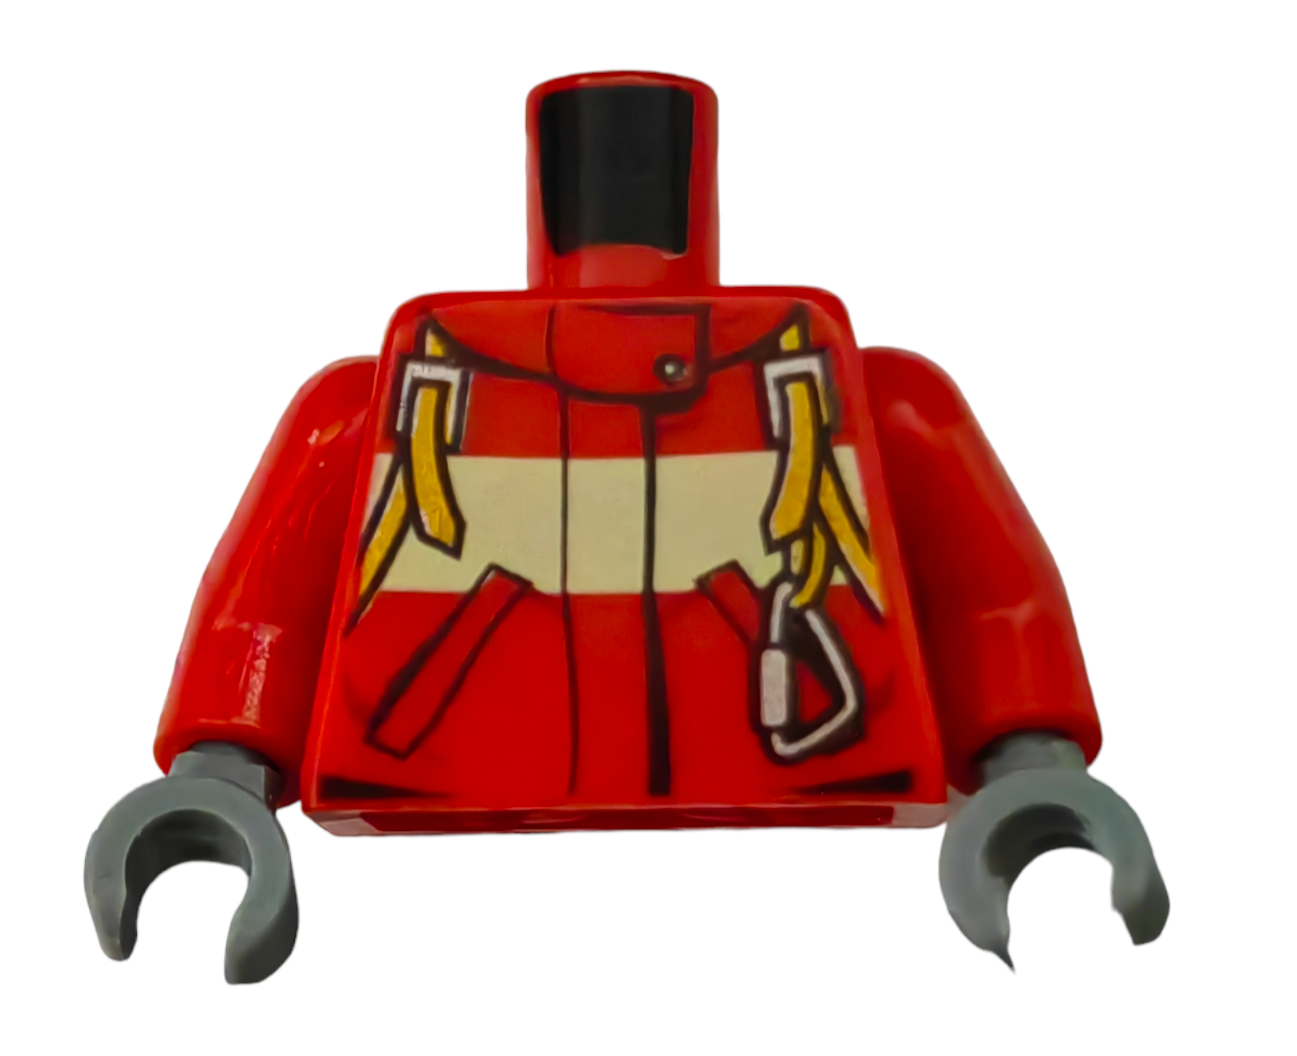 LEGO Torso, Rescue Fire Fighter Red Harness and Carabiner - UB1465